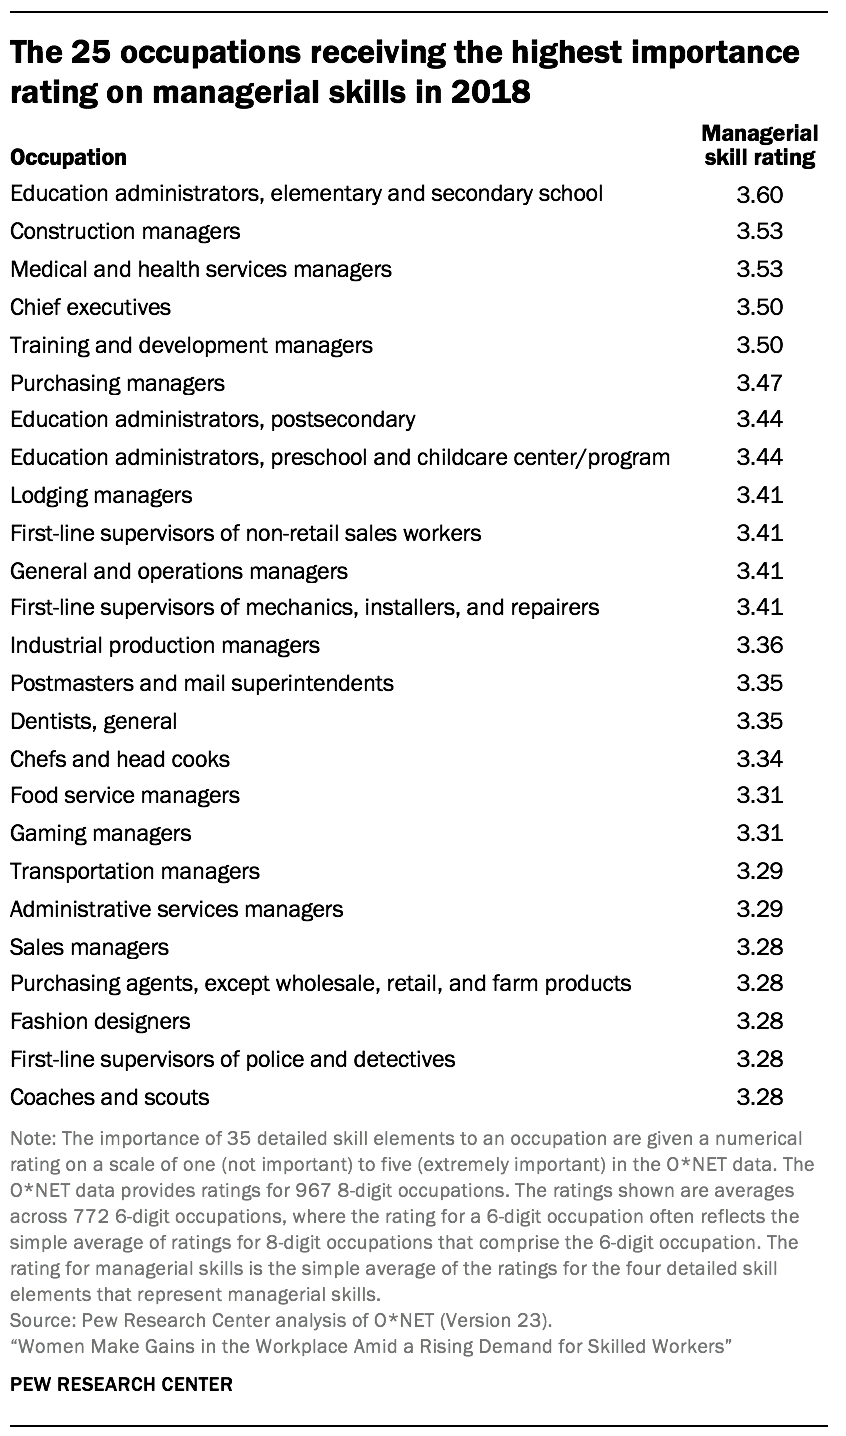 The 25 occupations receiving the highest importance rating on managerial skills in 2018